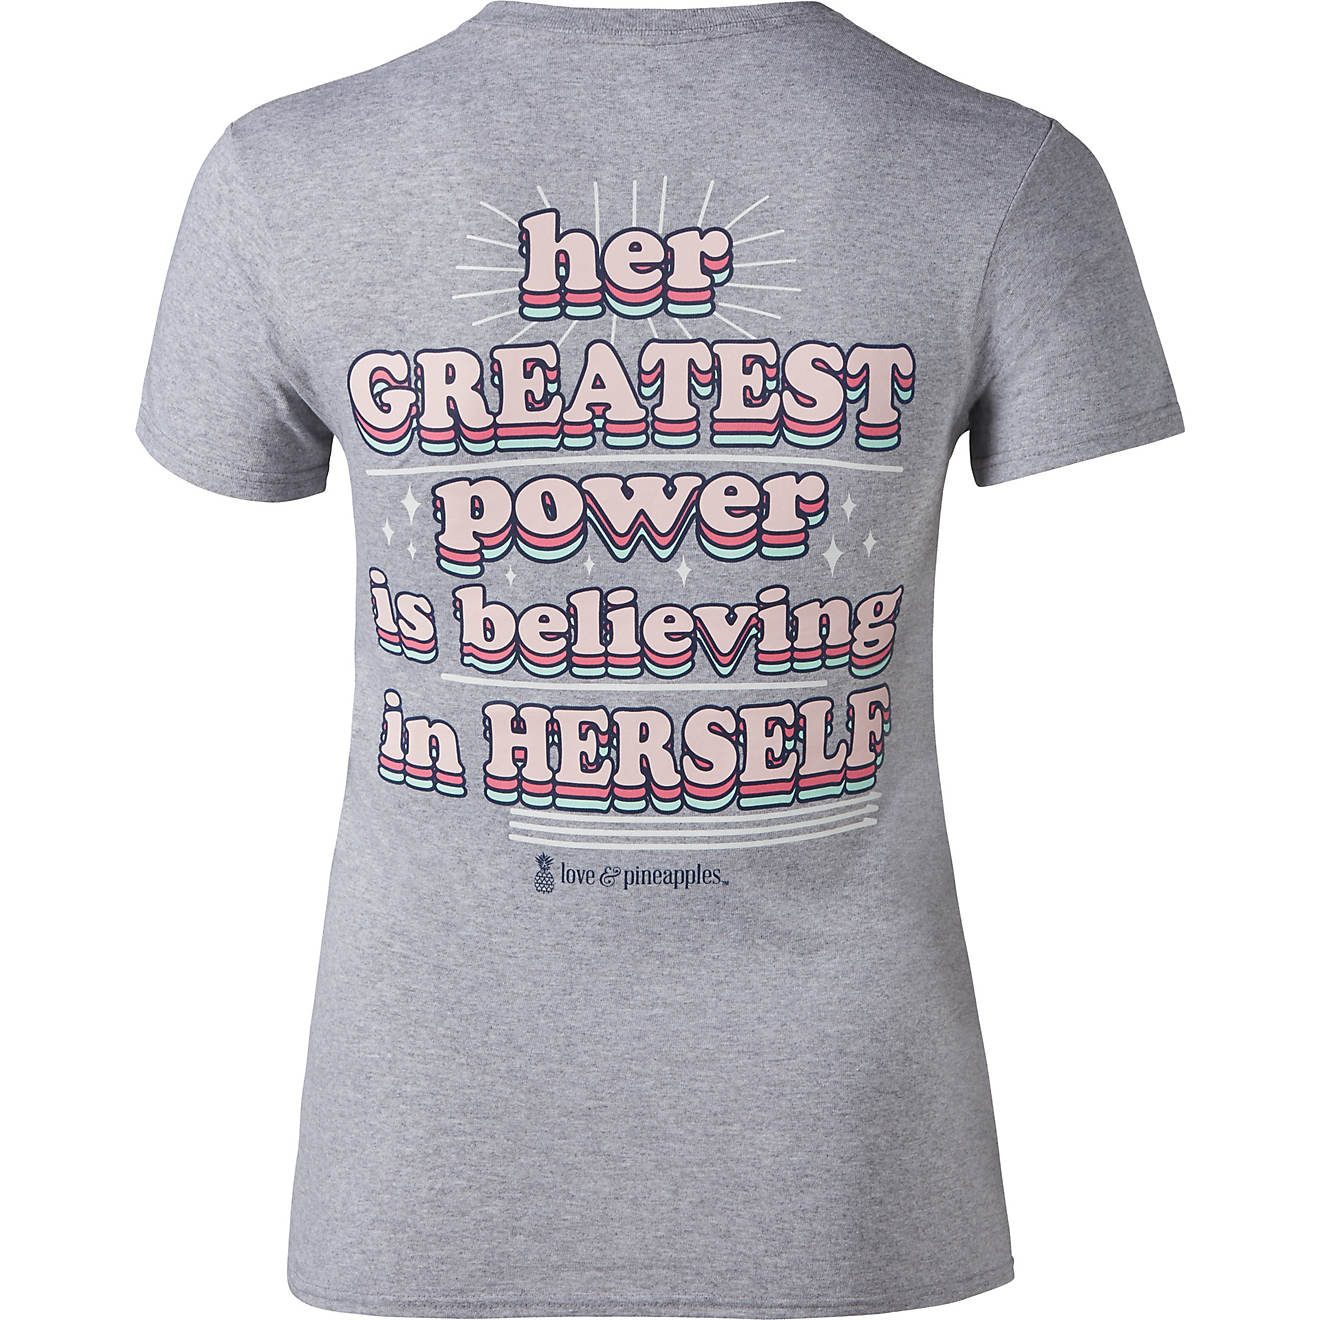 Love & Pineapples Women's Her Greatest Power Graphic T-shirt                                                                     - view number 1